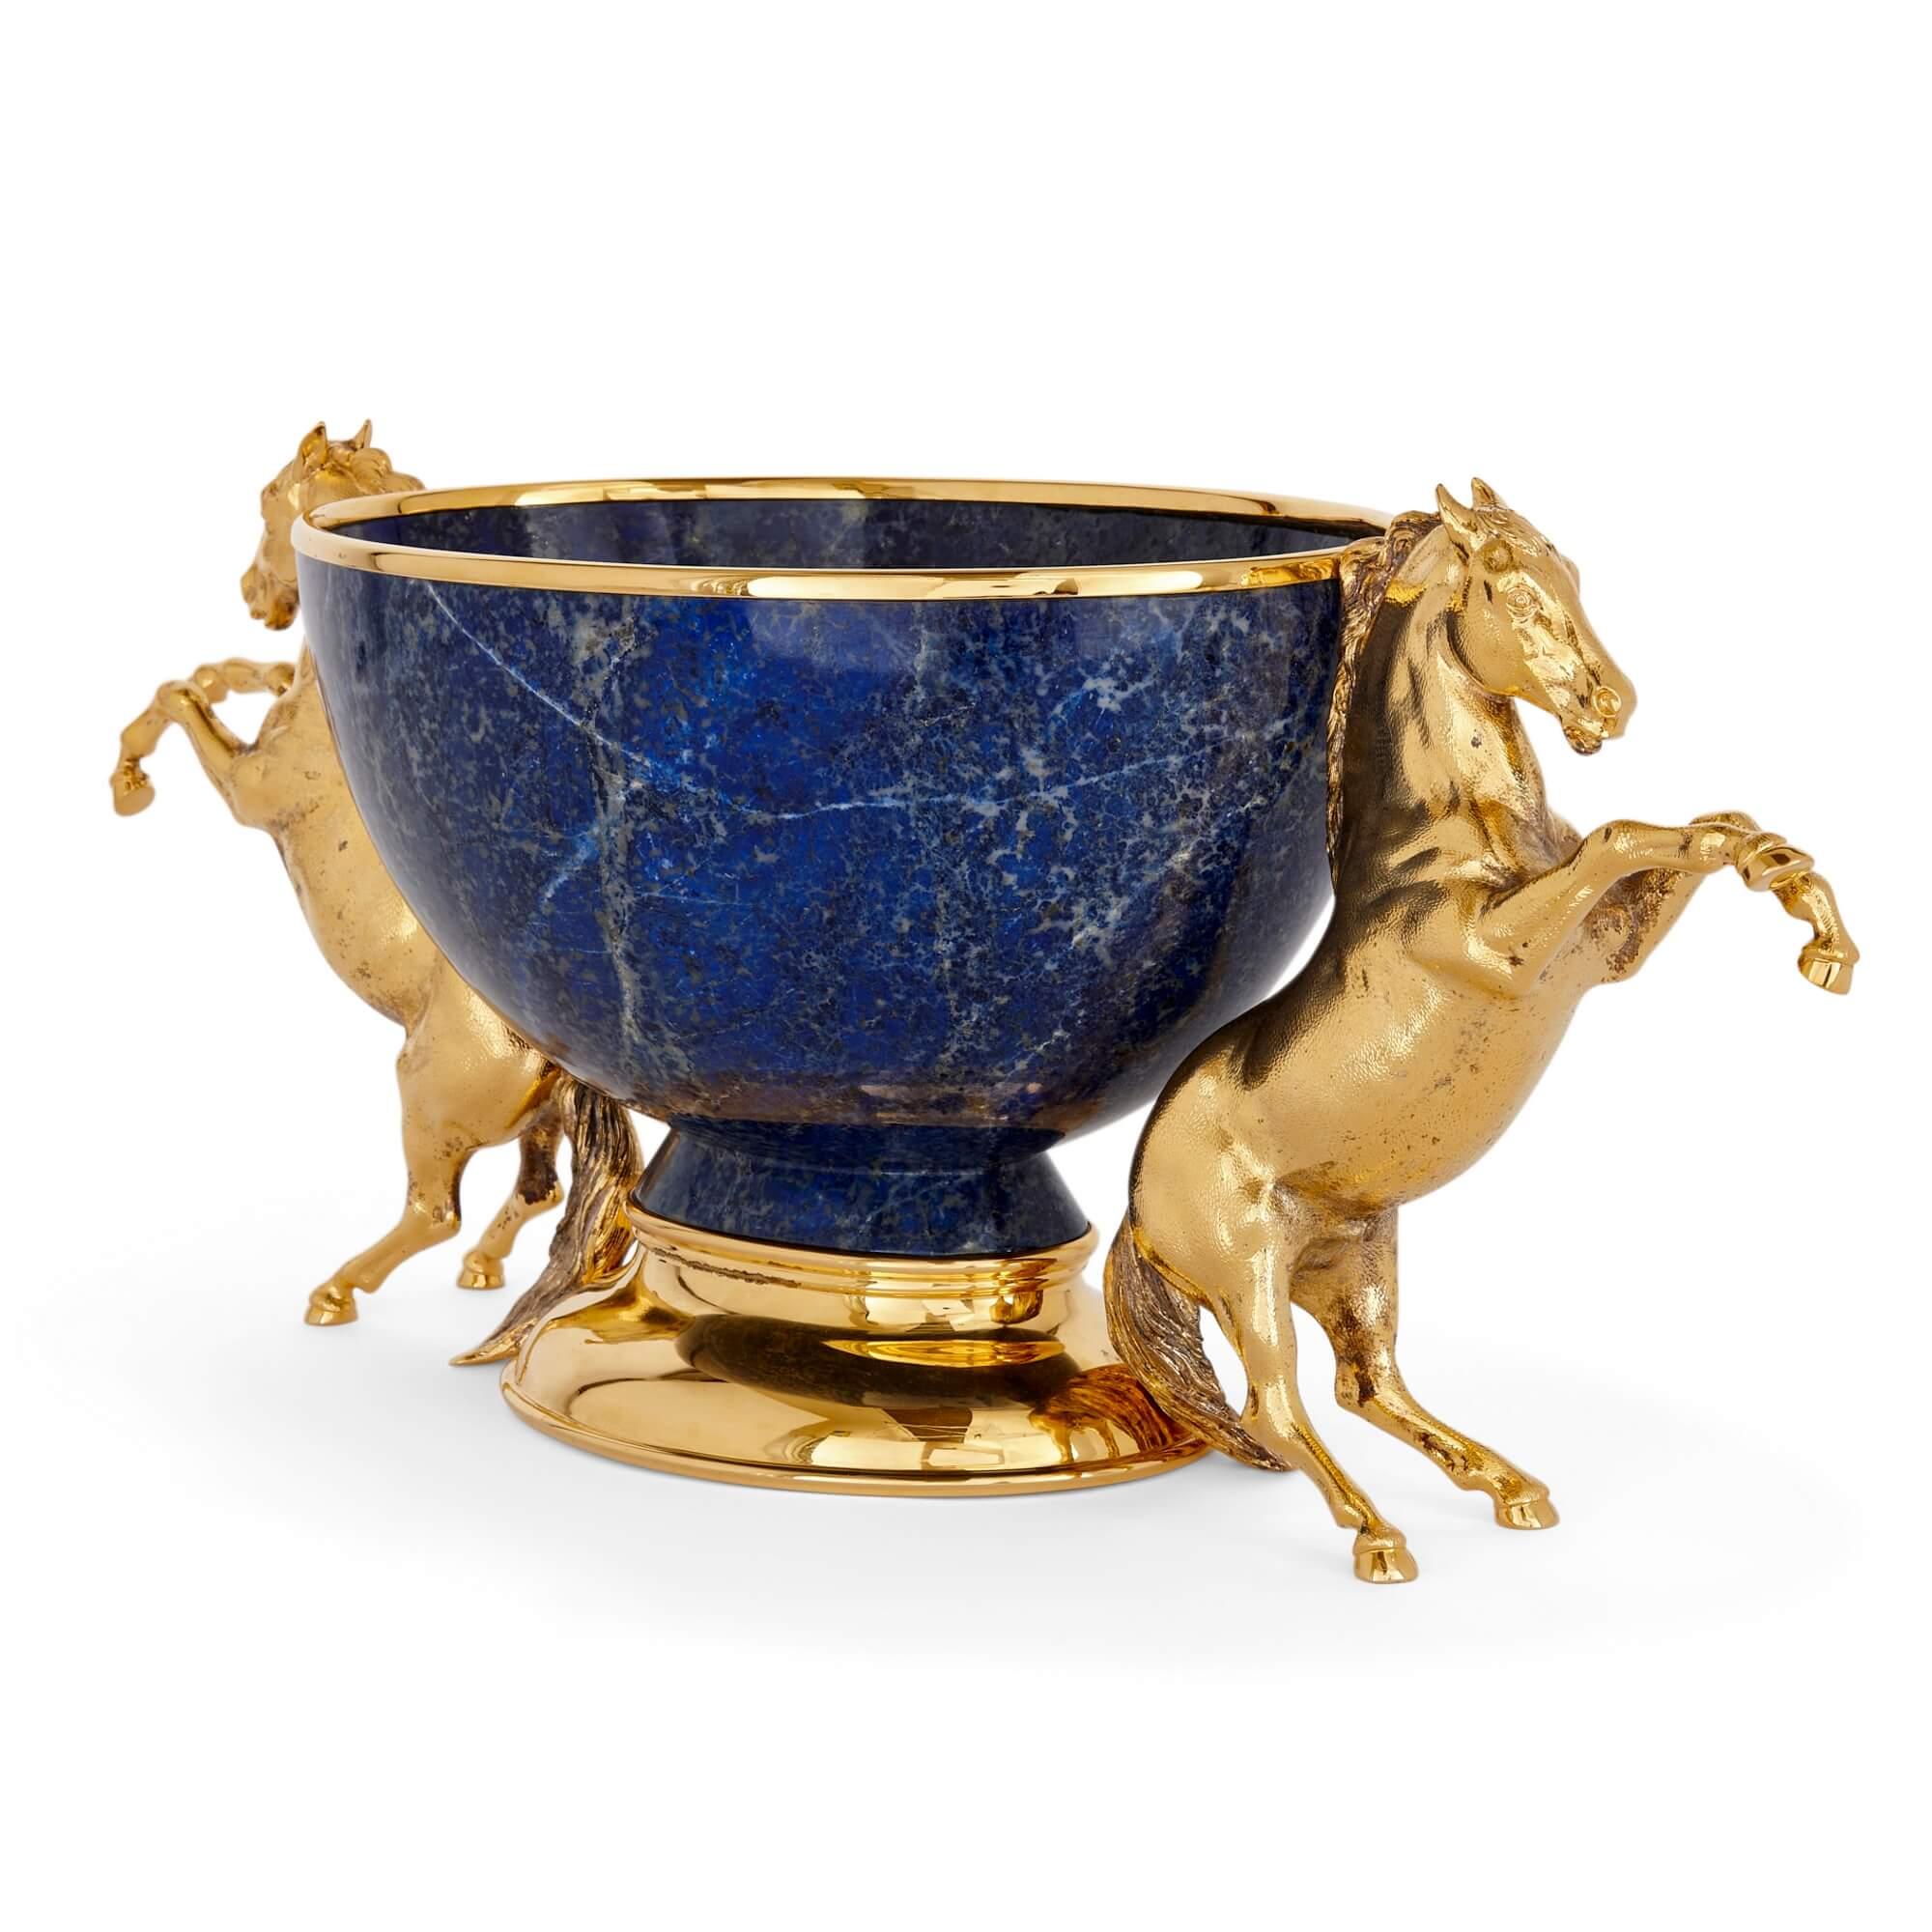 Very large vermeil and lapis lazuli centrepiece by Asprey 
English, c. 1980
Height 29cm, width 70cm, depth 27cm

Made by the renowned firm of Asprey in around 1980, this vermeil (silver gilt) and lapis lazuli centrepiece is of an impressive size and